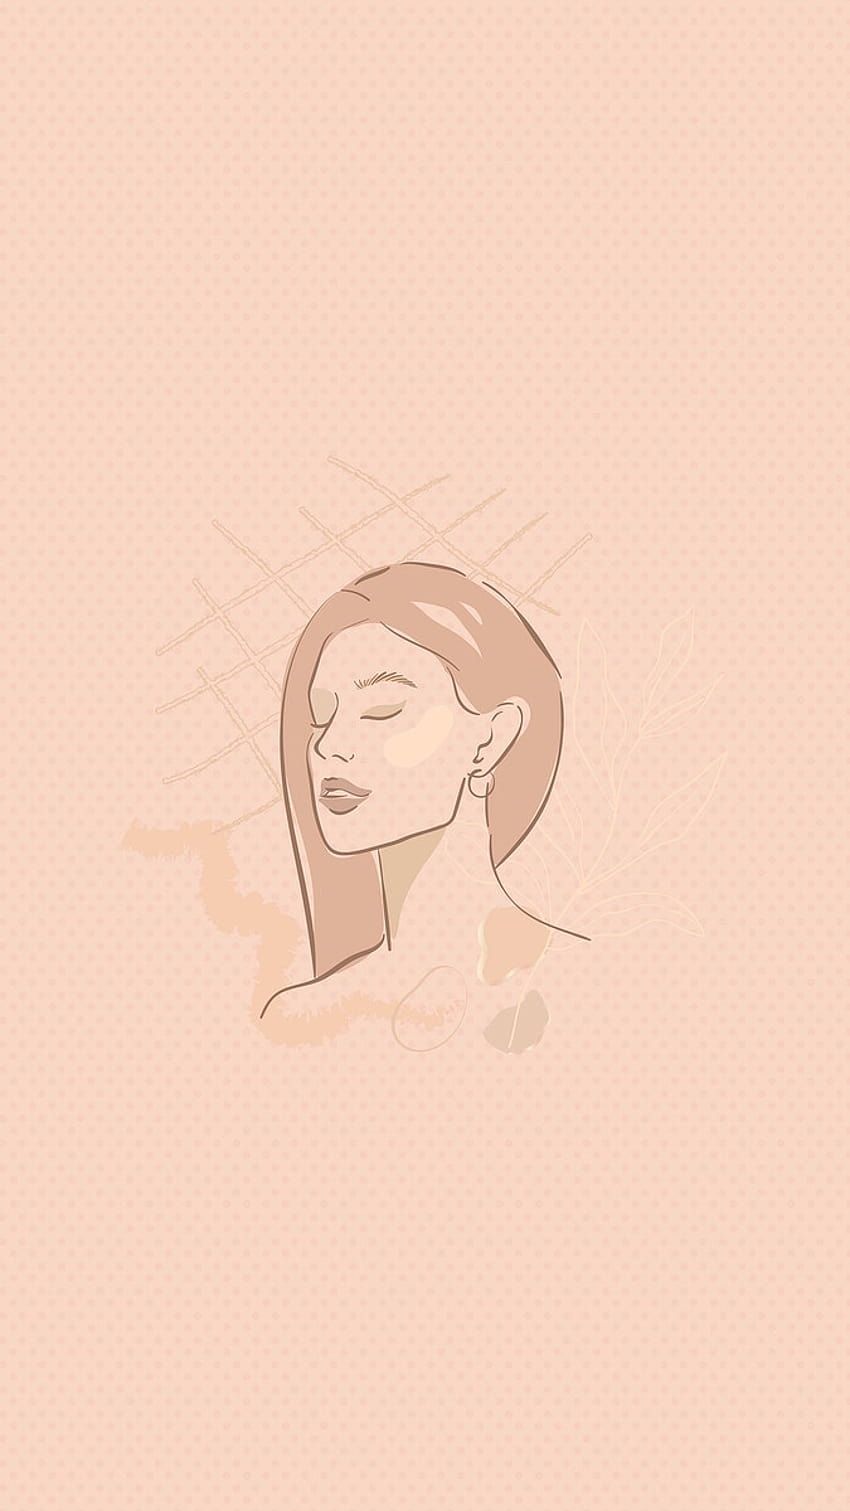 An illustration of a woman with her eyes closed. - Vector